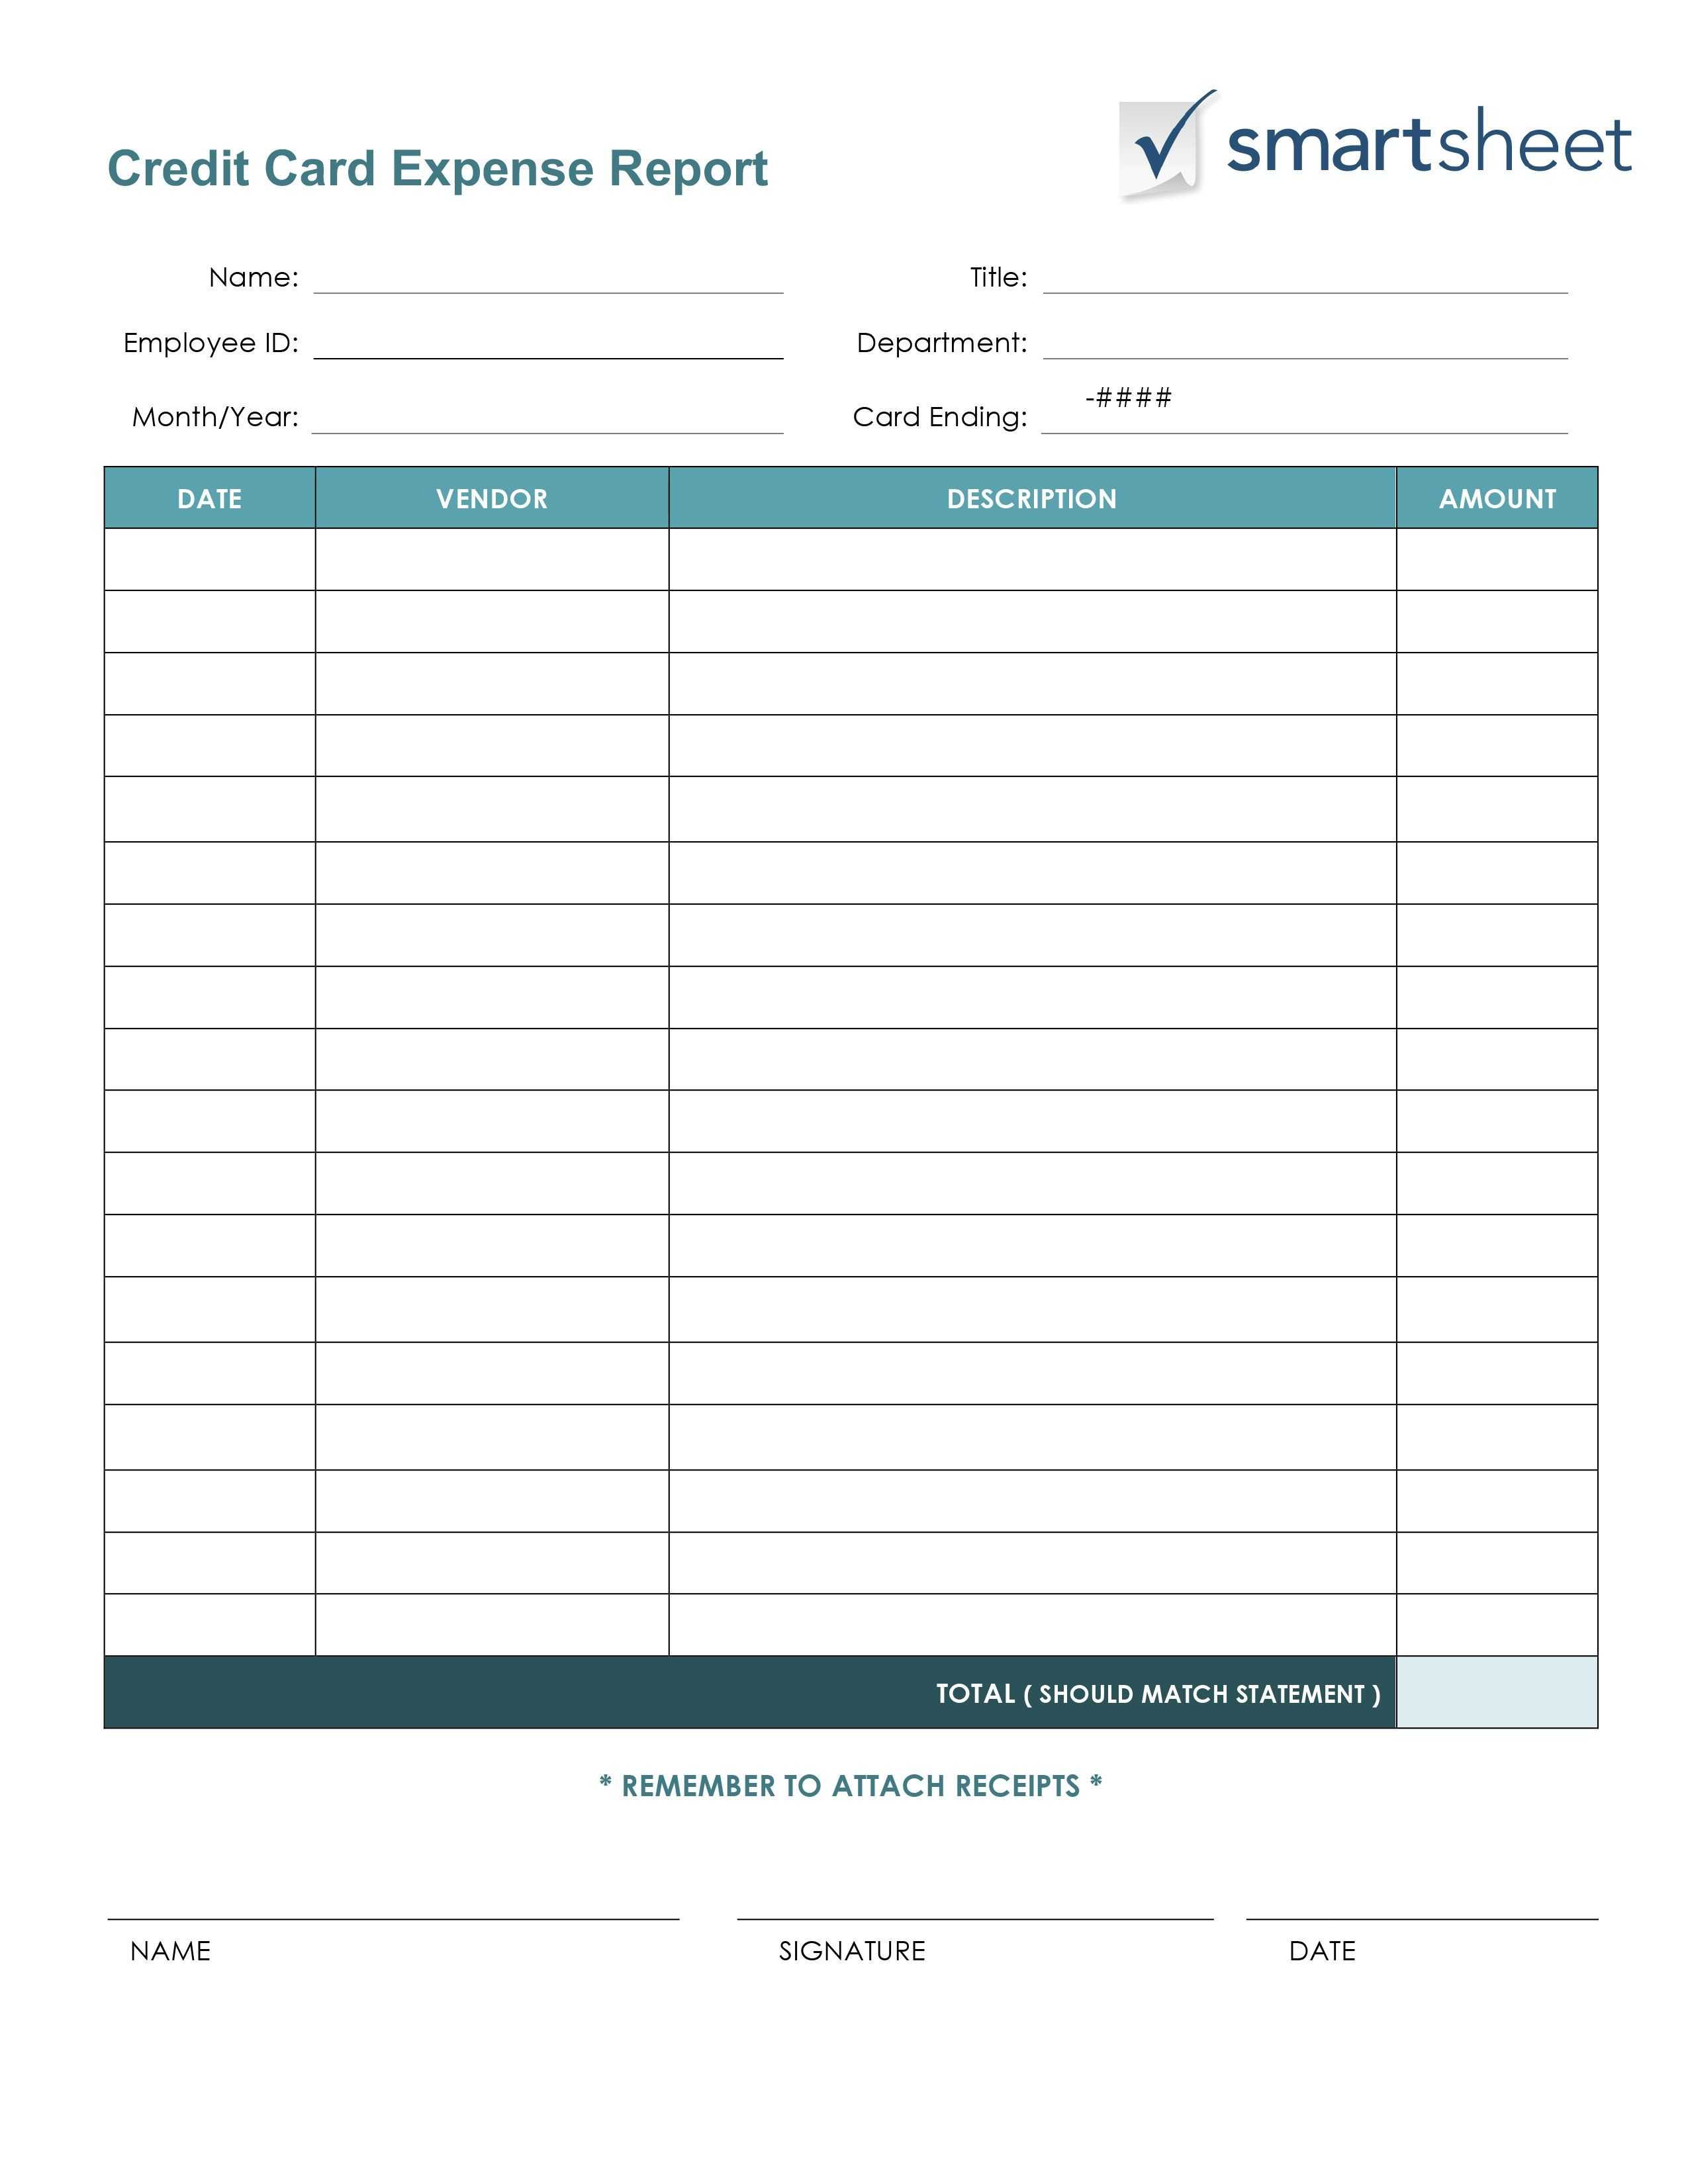 Employee Expense Report Template | 11+ Free Docs, Xlsx & Pdf With Regard To Expense Report Spreadsheet Template